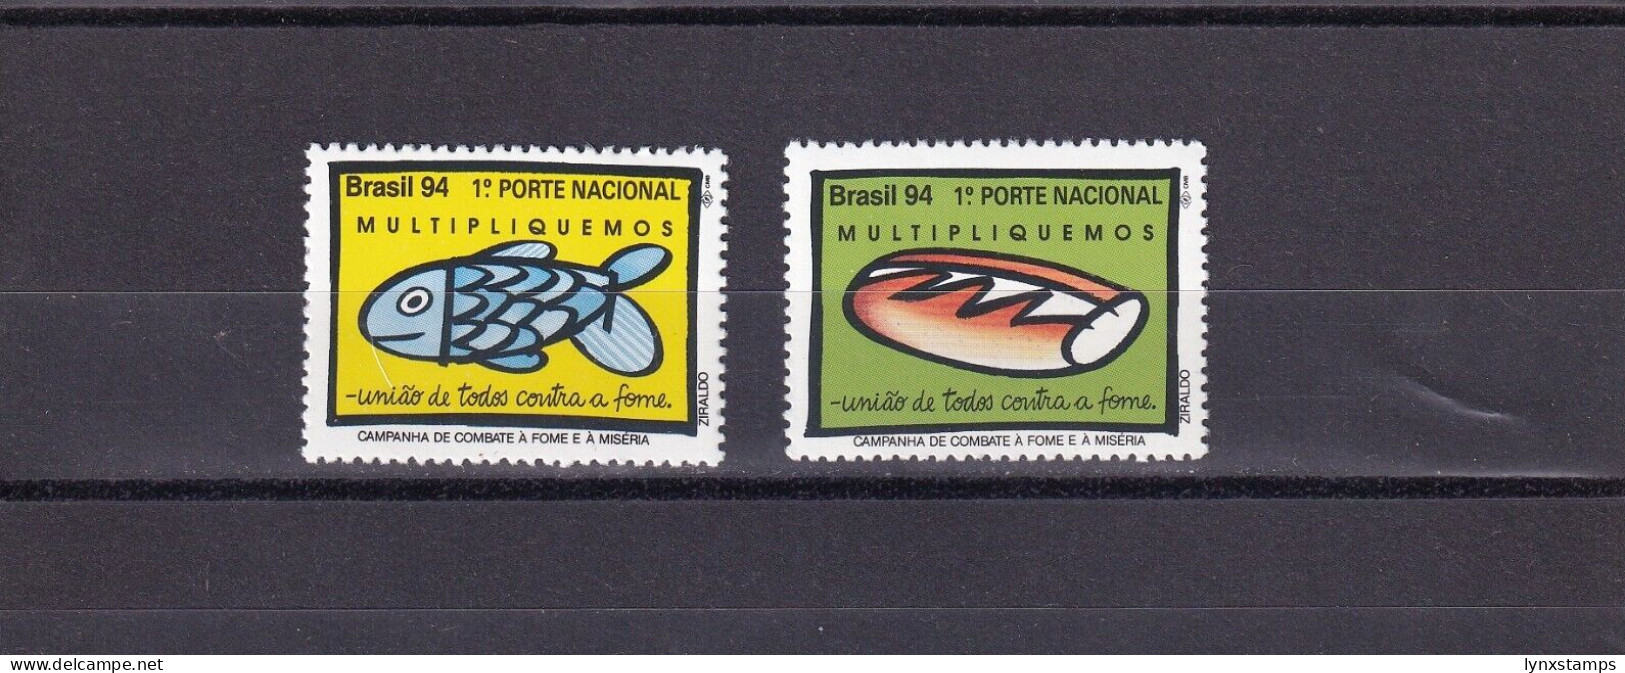 SA06 Brazil 1994 Campaign Against Famine And Misery Mint Stamps - Neufs